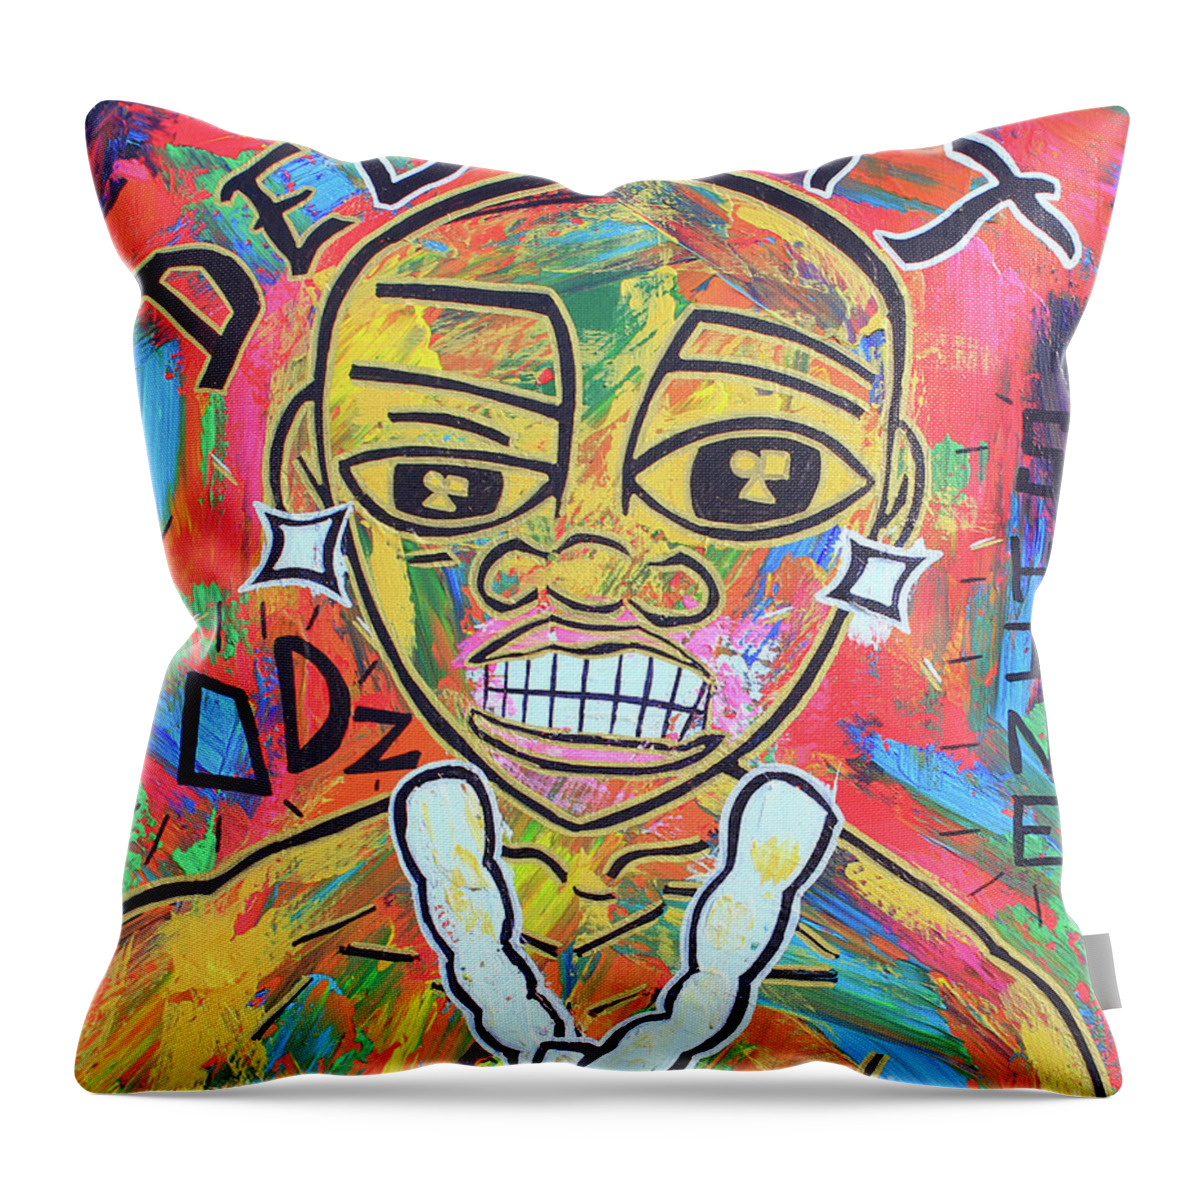 Painting - Acrylic Throw Pillow featuring the painting The Rappers Delight by Odalo Wasikhongo